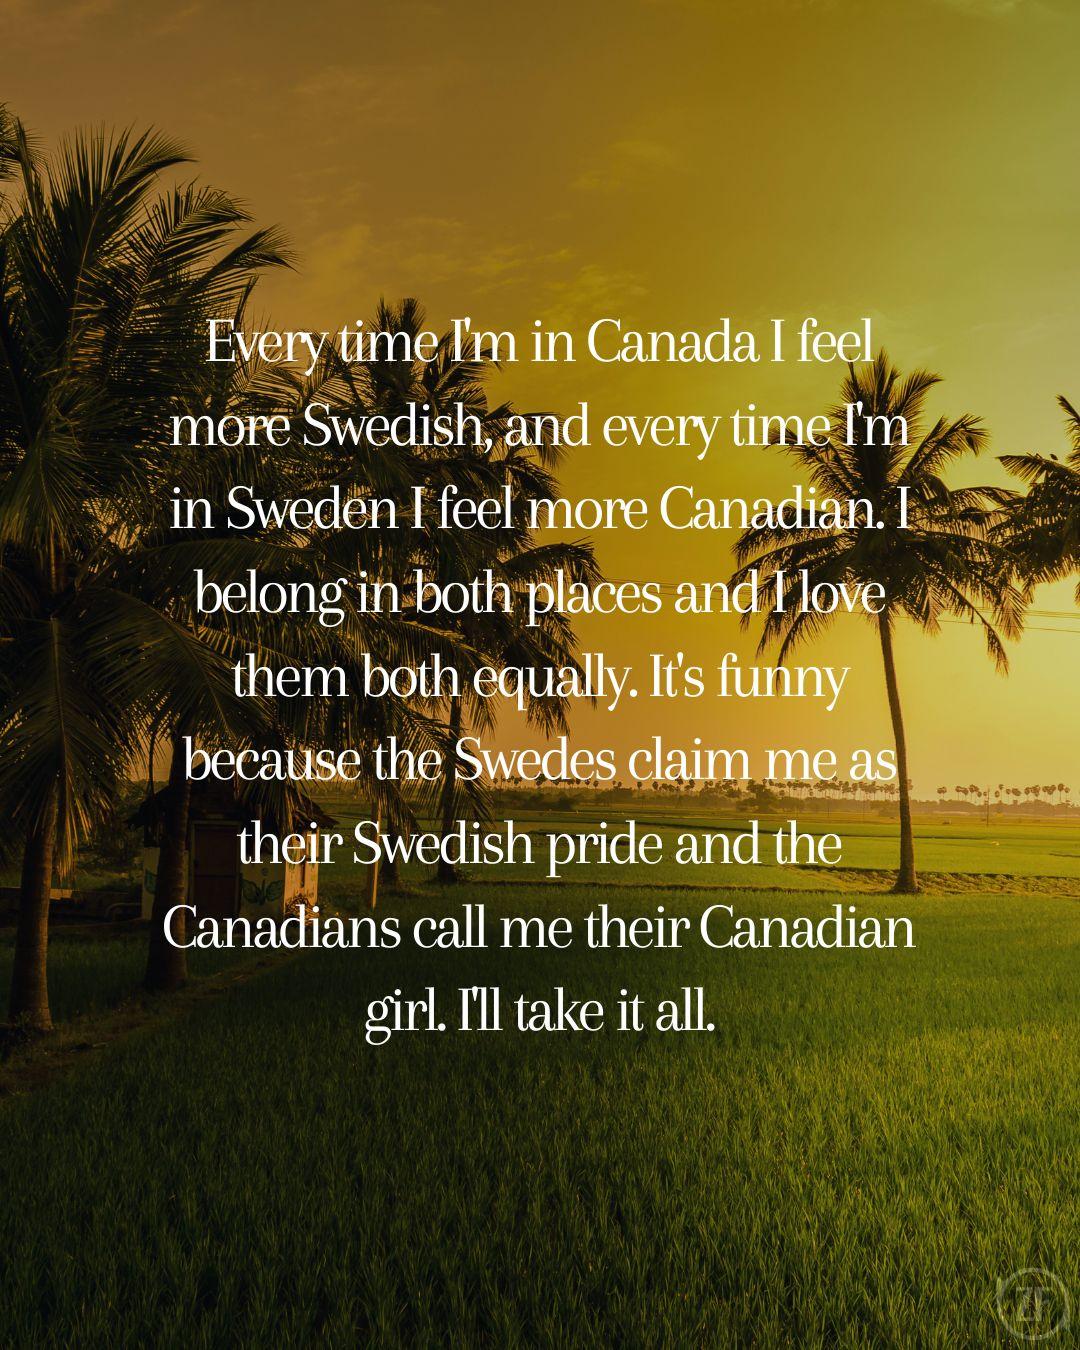 Every time I'm in Canada I feel more Swedish, and every time I'm in Sweden I feel more Canadian. I belong in both places and I love them both equally. It's funny because the Swedes claim me as their Swedish pride and the Canadians call me their Canadian girl. I'll take it all.